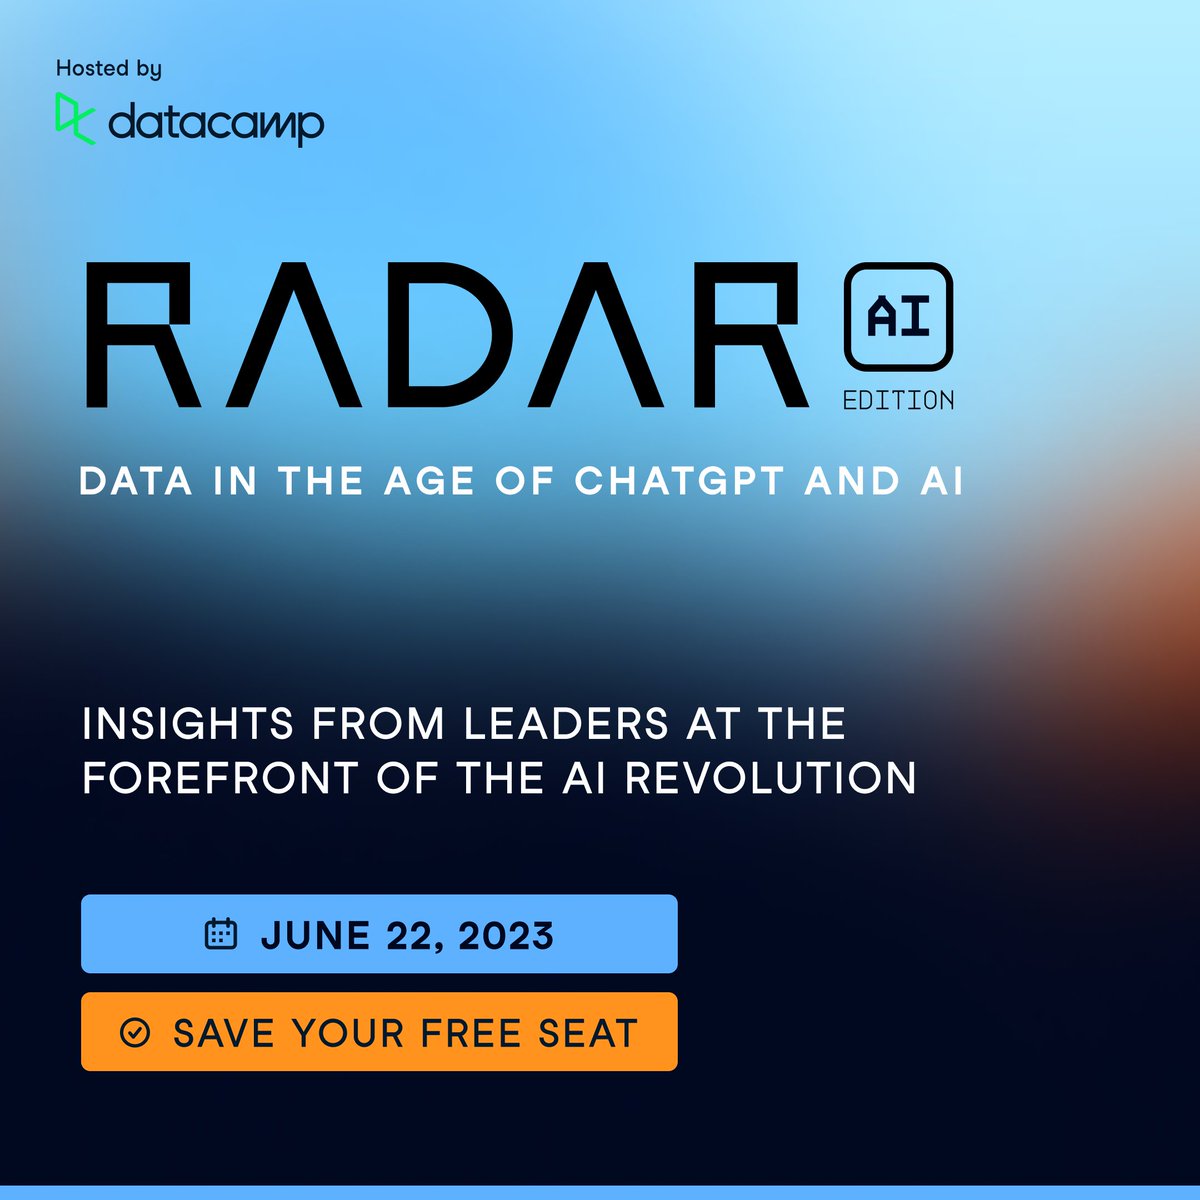 Announcing #RADARAI: a special edition of our annual RADAR event featuring leaders at the forefront of AI transformation. Throughout, we’ll focus on how individuals and organizations can succeed with data in the era of AI, featuring speakers from @Microsoft, @thoughtspot,…